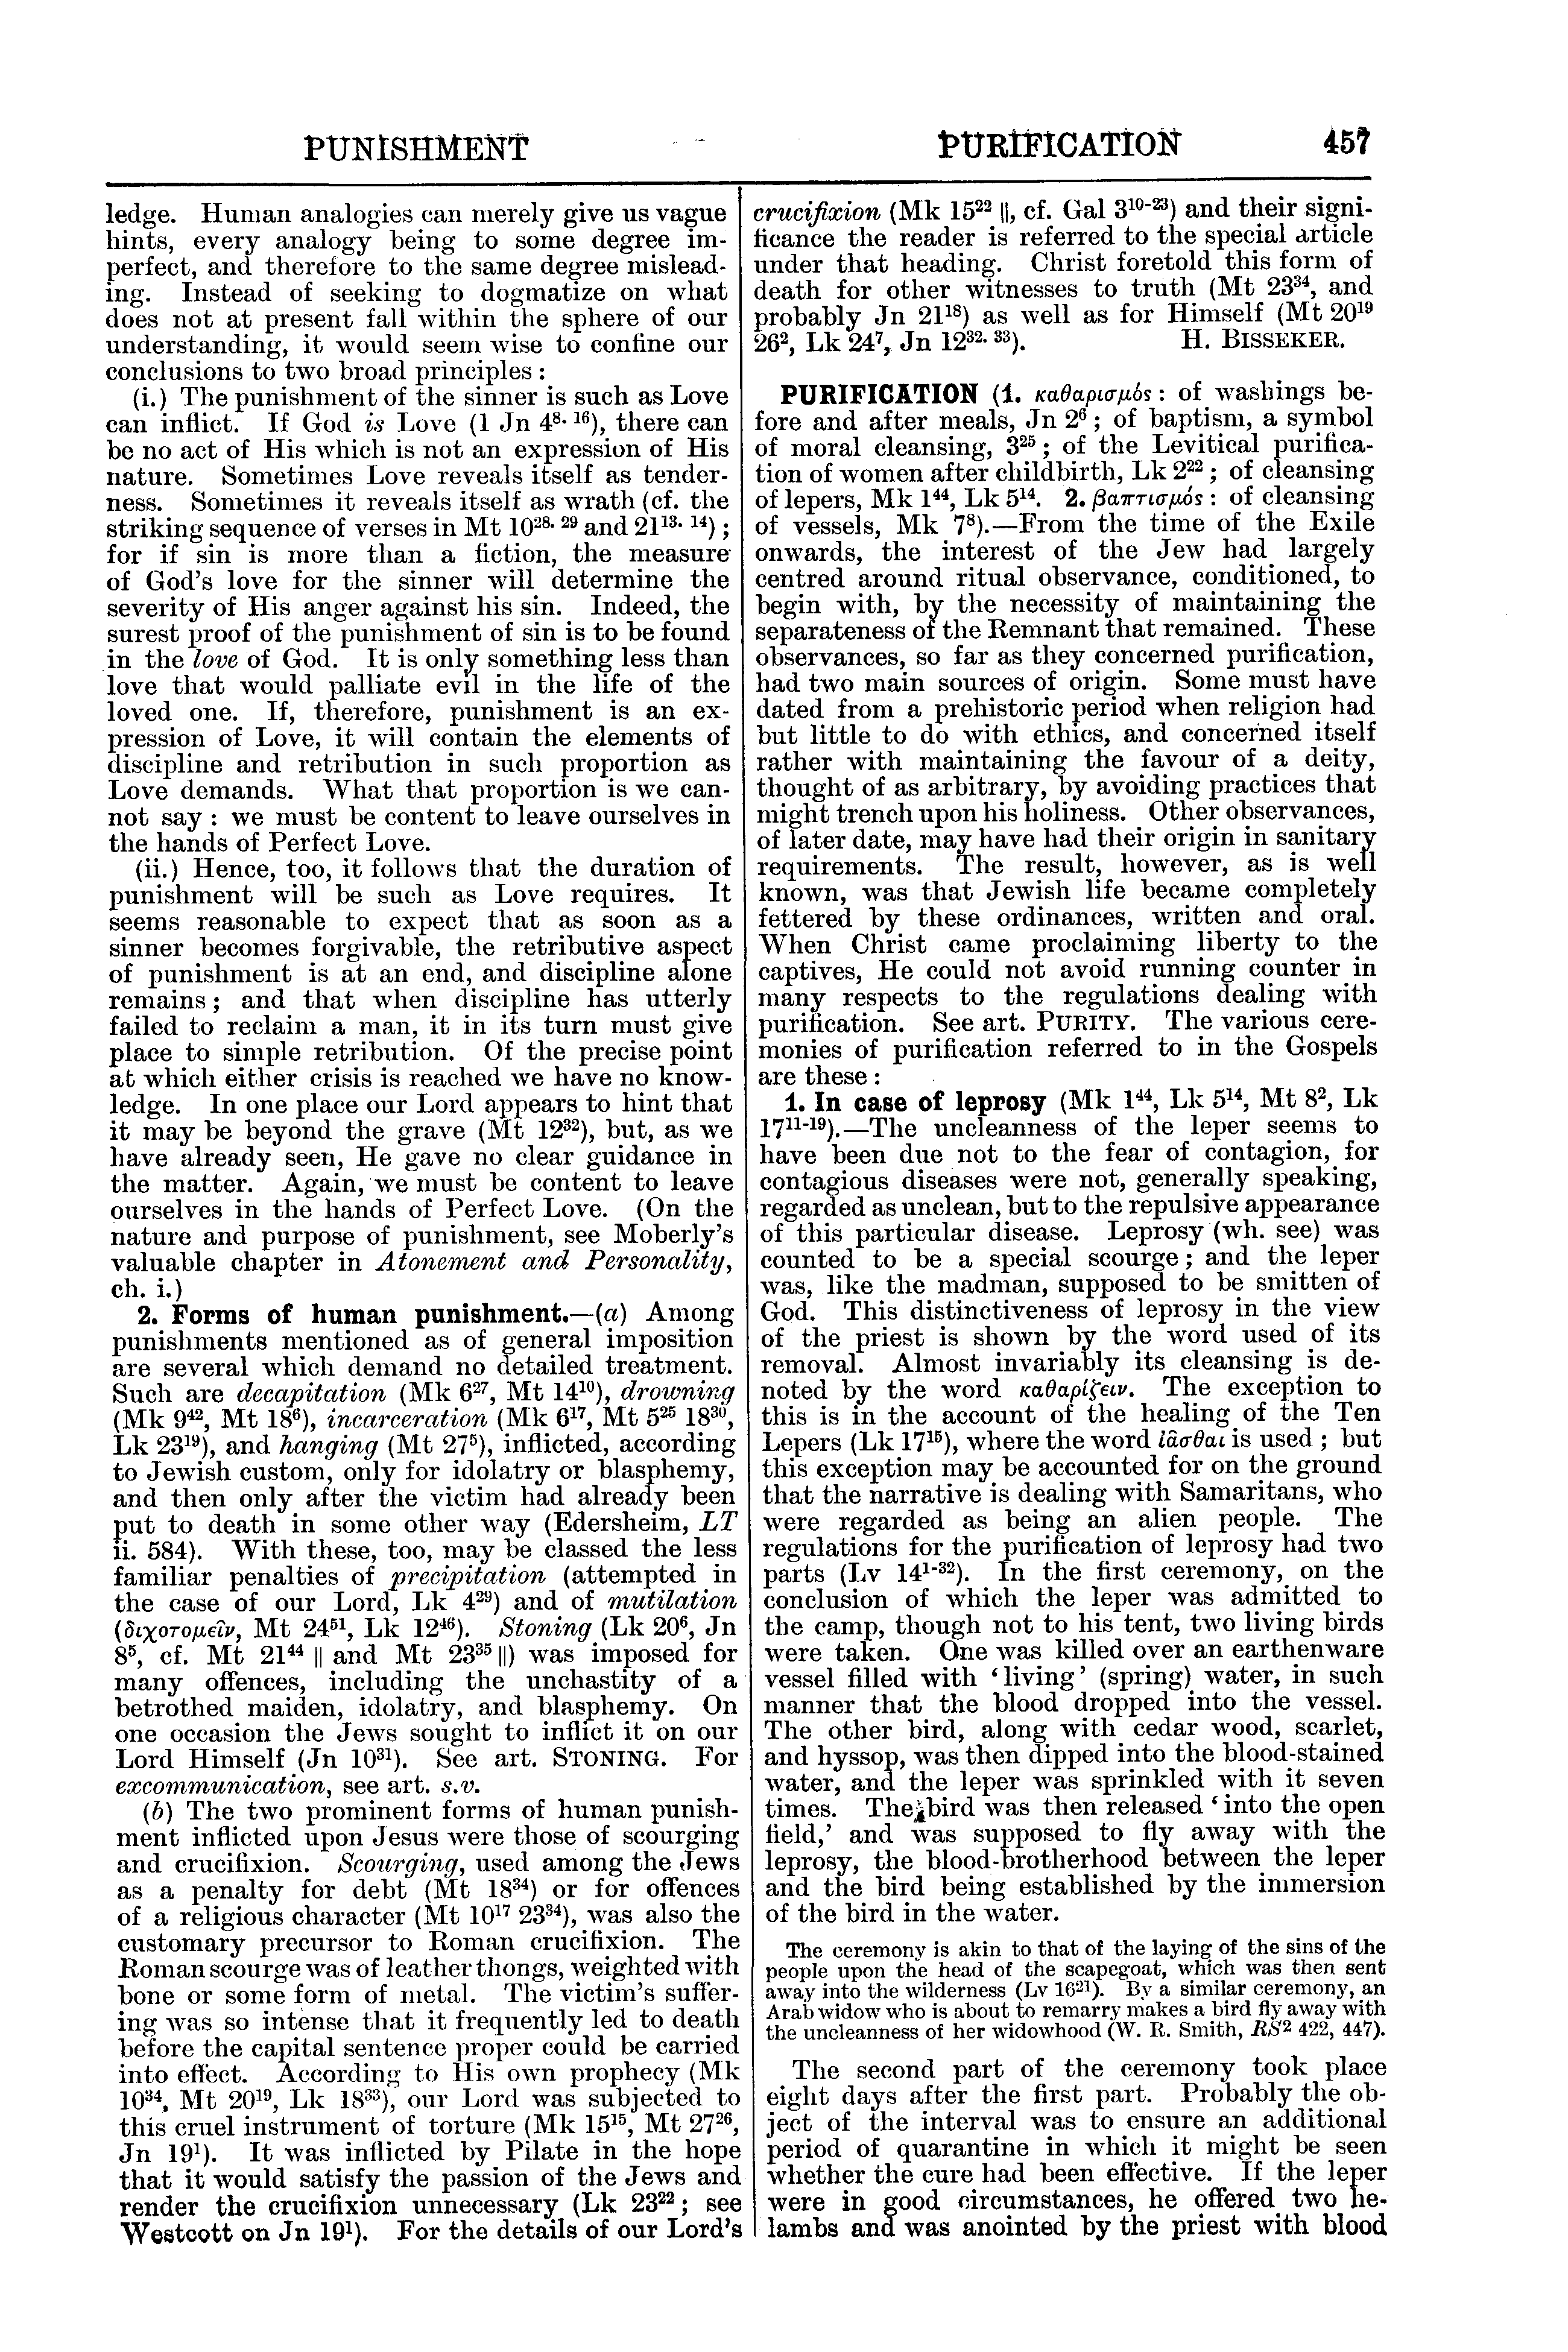 Image of page 457